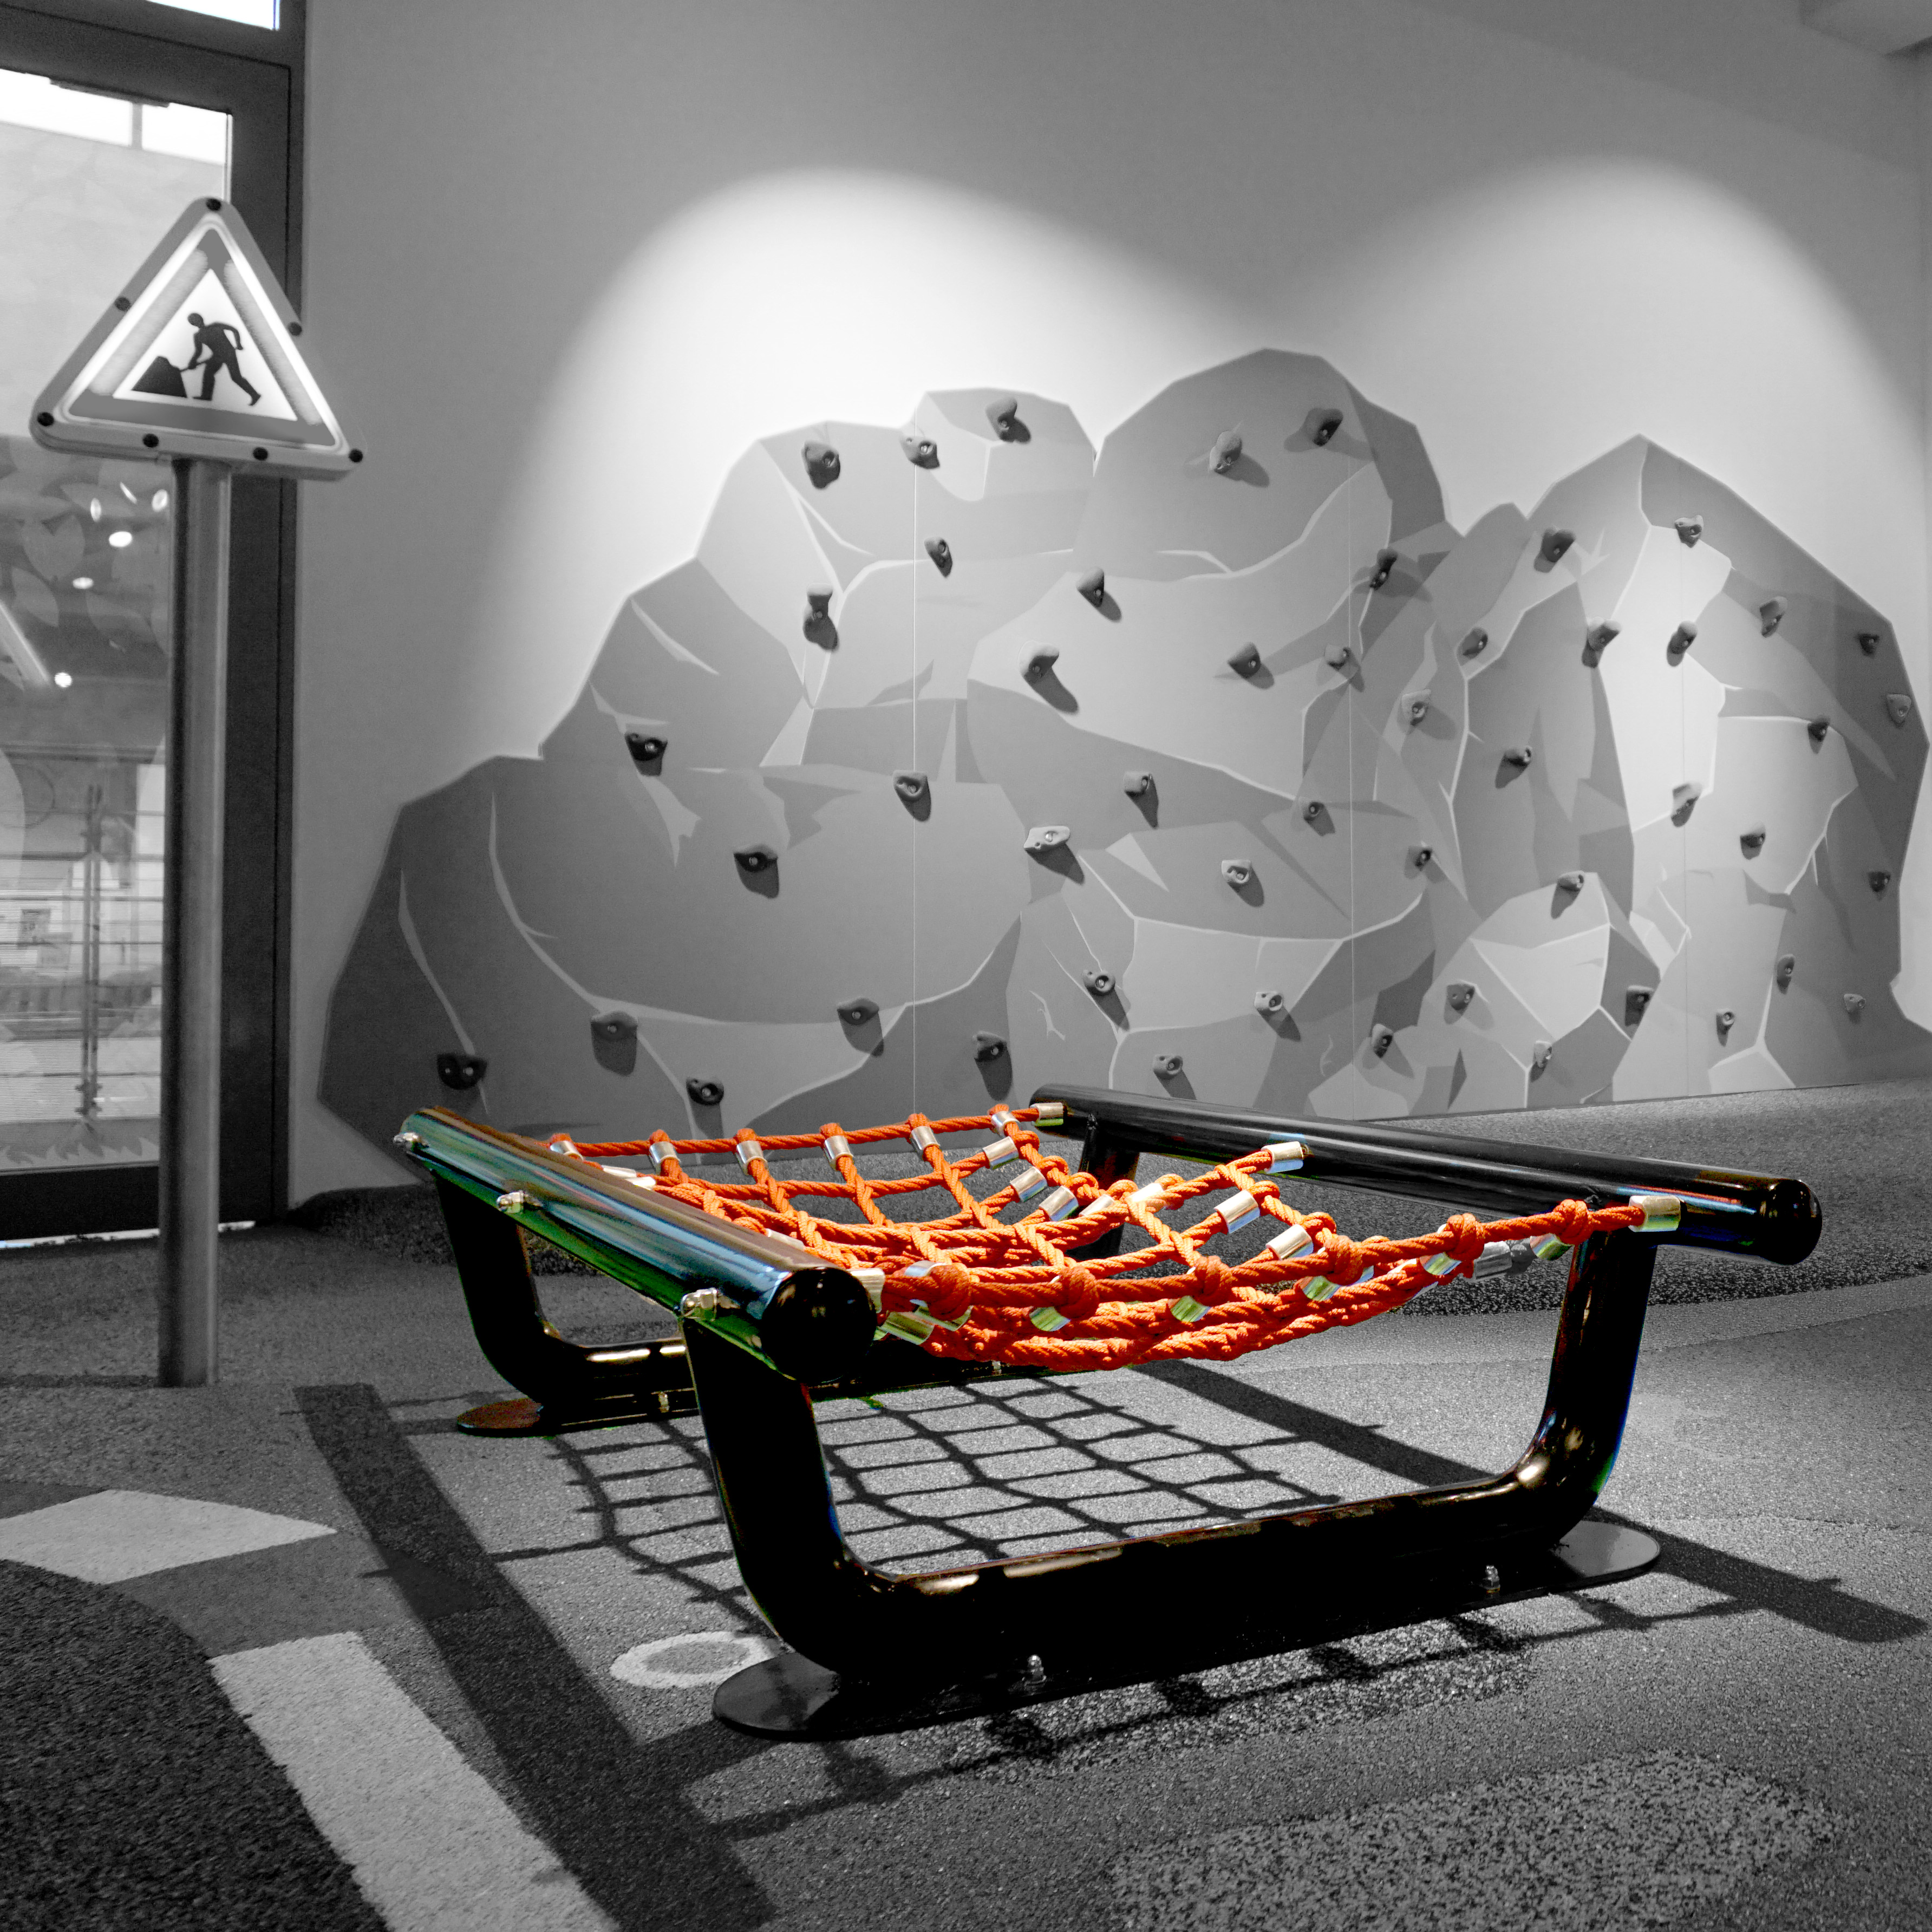 A rope bridge for a children's corner, playground or other play area to climb and balance on